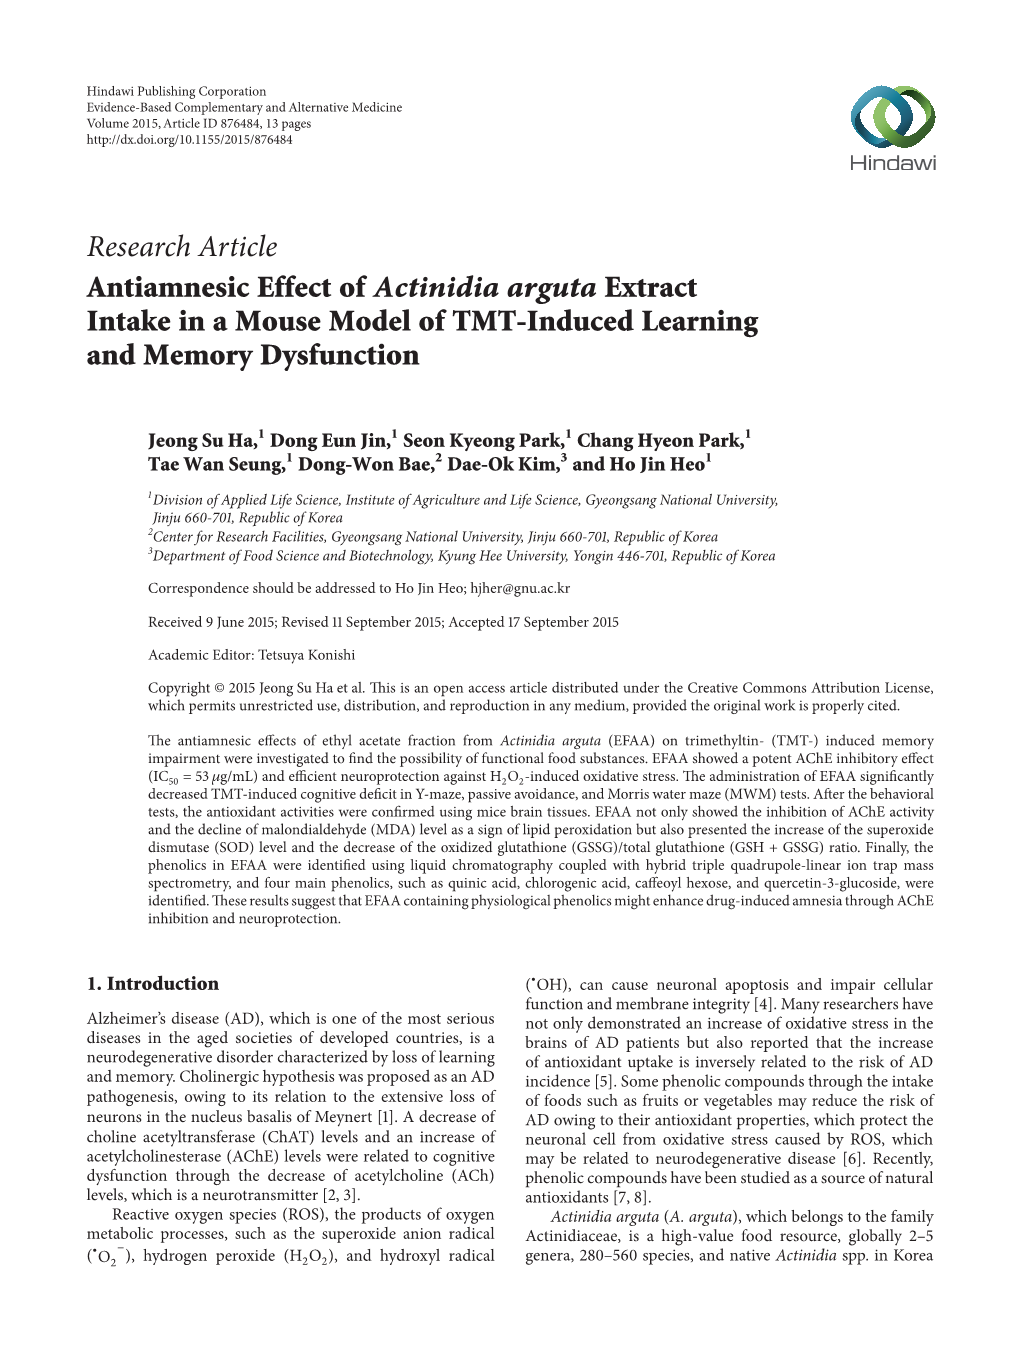 Research Article Antiamnesic Effect of Actinidia Arguta Extract Intake in a Mouse Model of TMT-Induced Learning and Memory Dysfunction